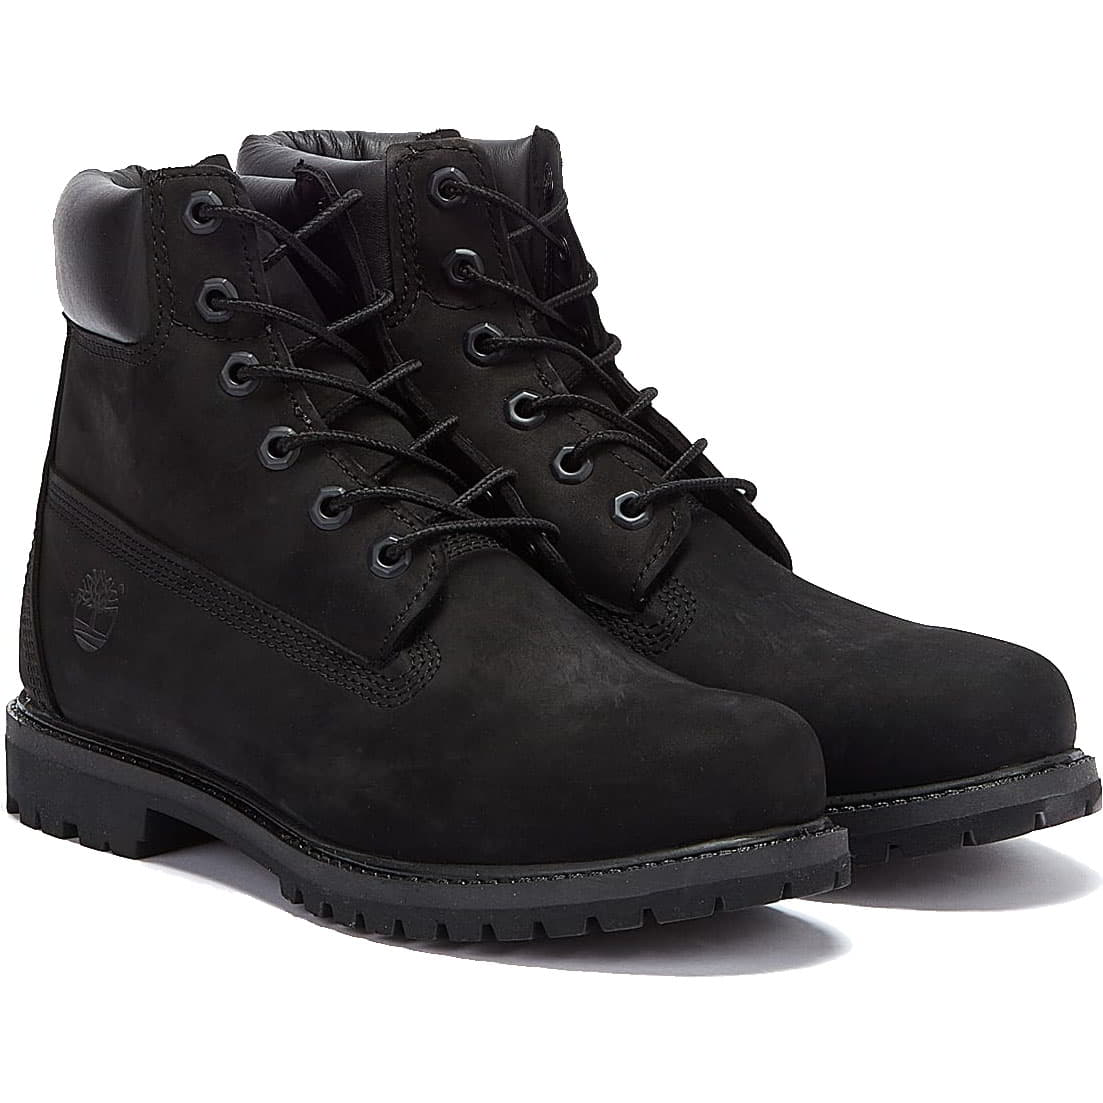 Timberland Icon Women's 6 Inch Premium Waterproof Boots Wide Fit - Black - UK 7